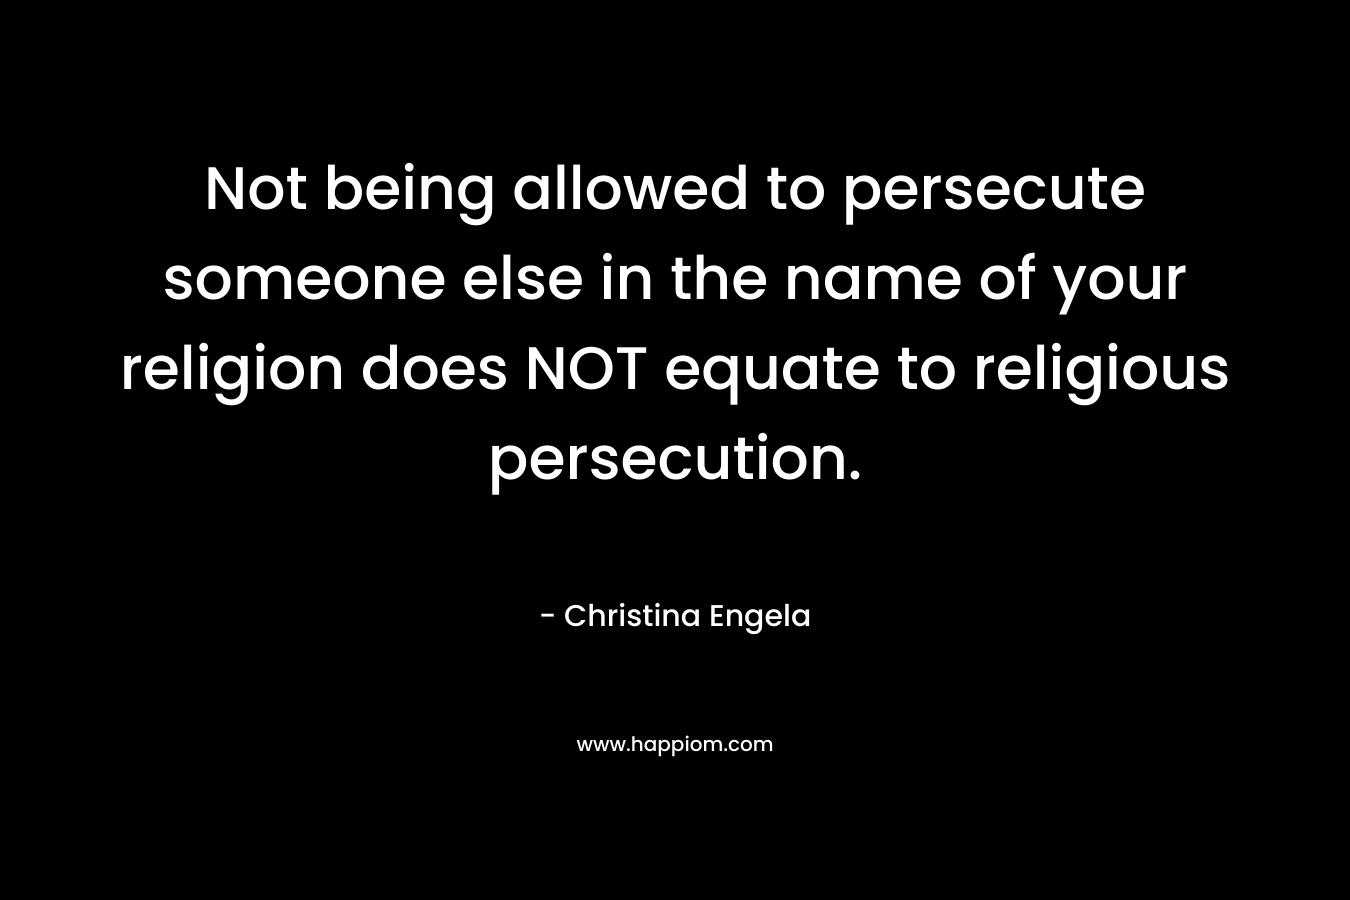 Not being allowed to persecute someone else in the name of your religion does NOT equate to religious persecution.